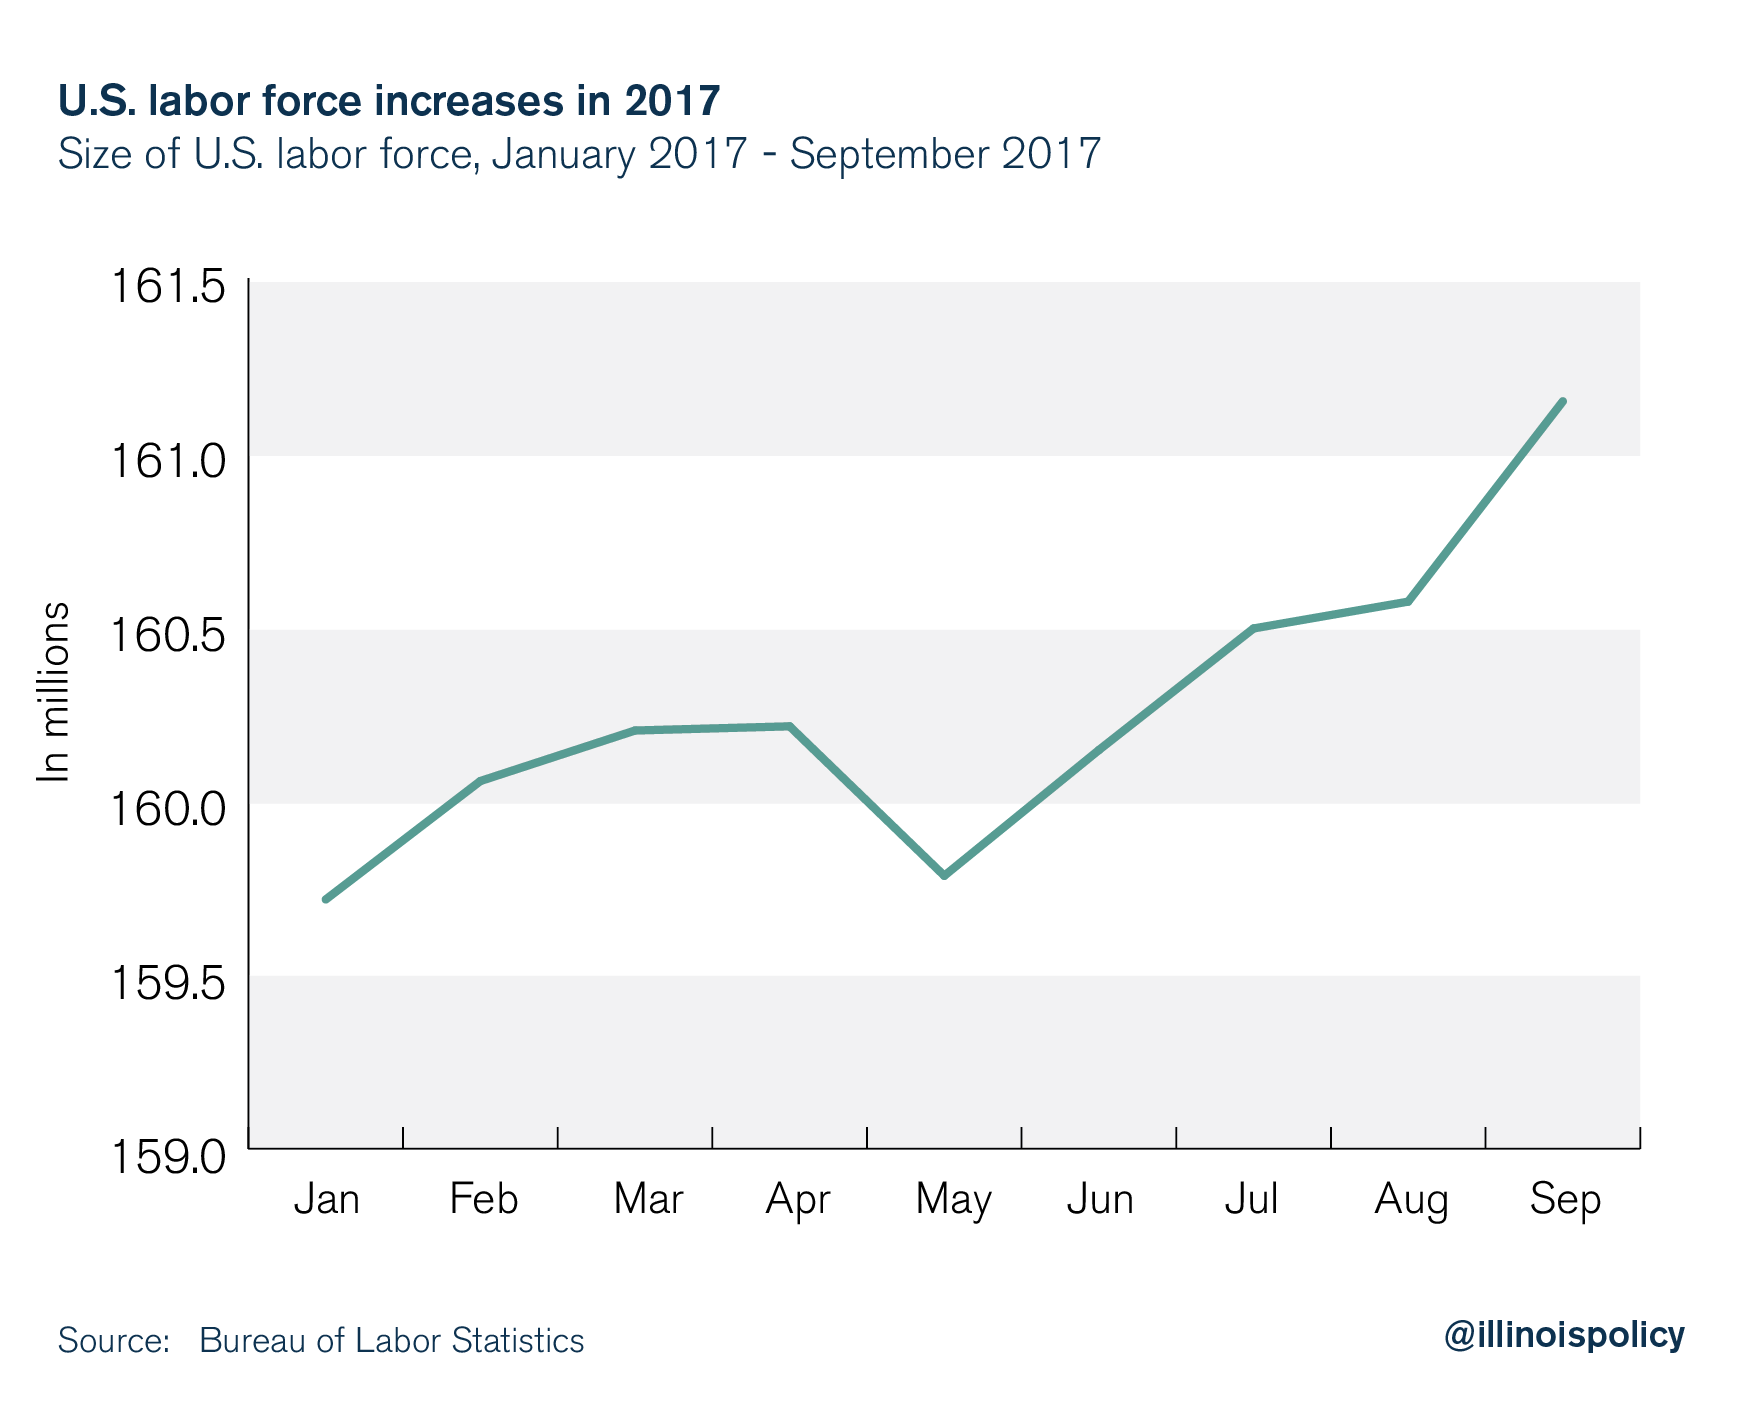 US labor force increases in 2017